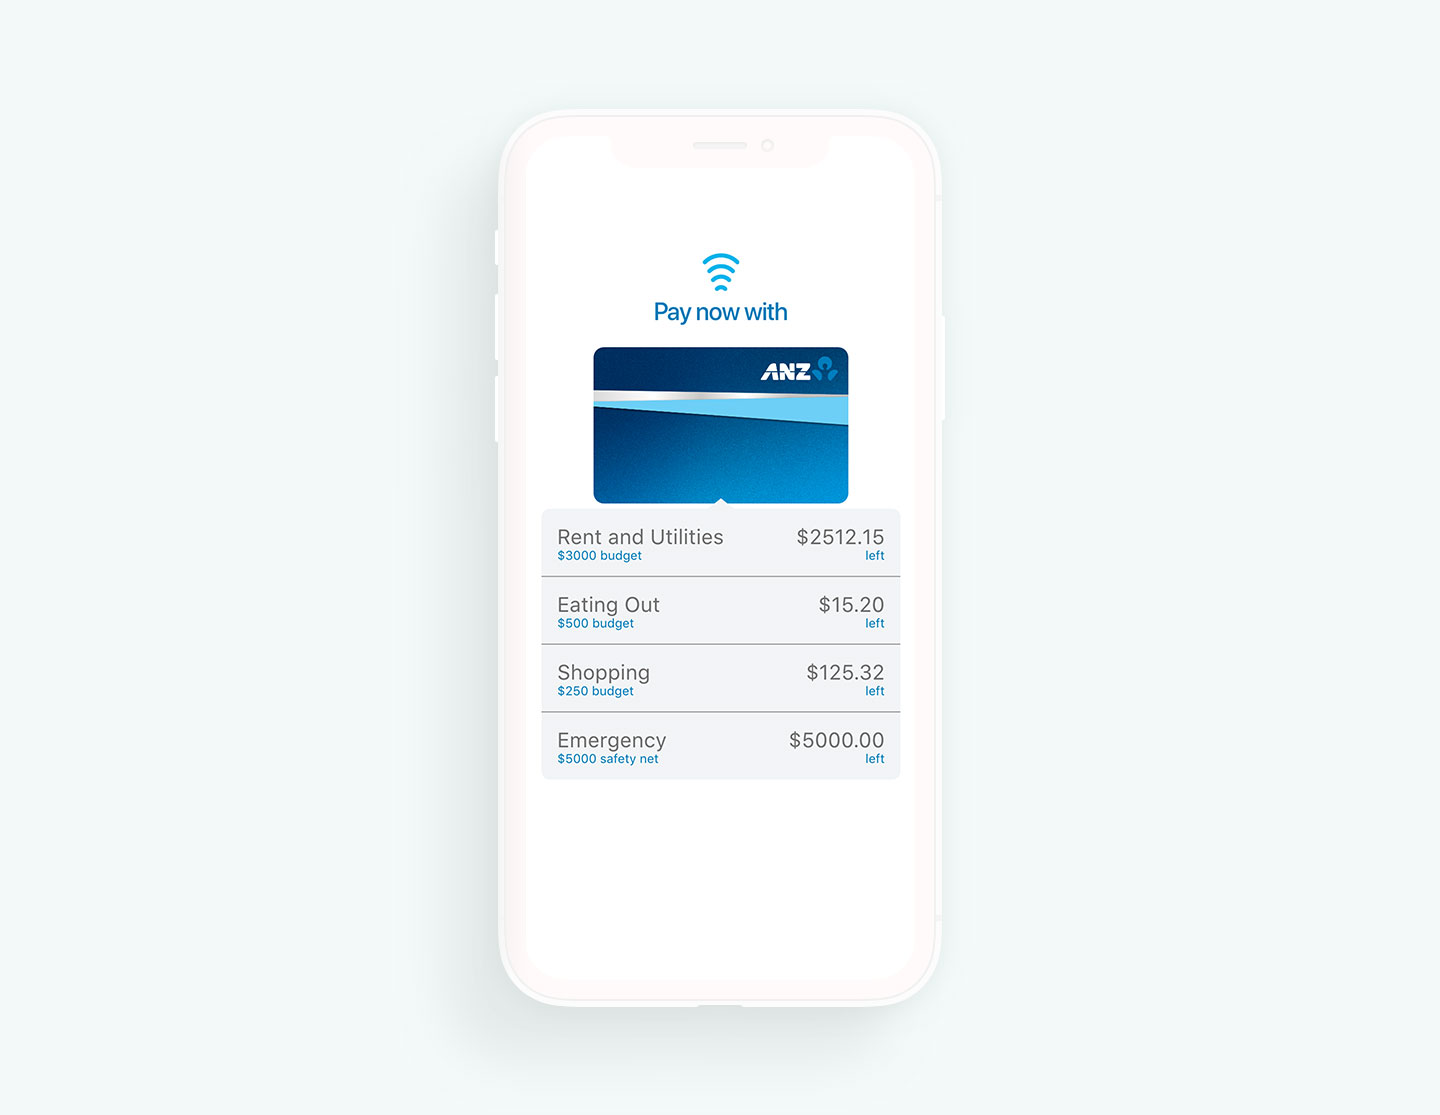 A prototype of a mobile interface developed to test new features with ANZ customers